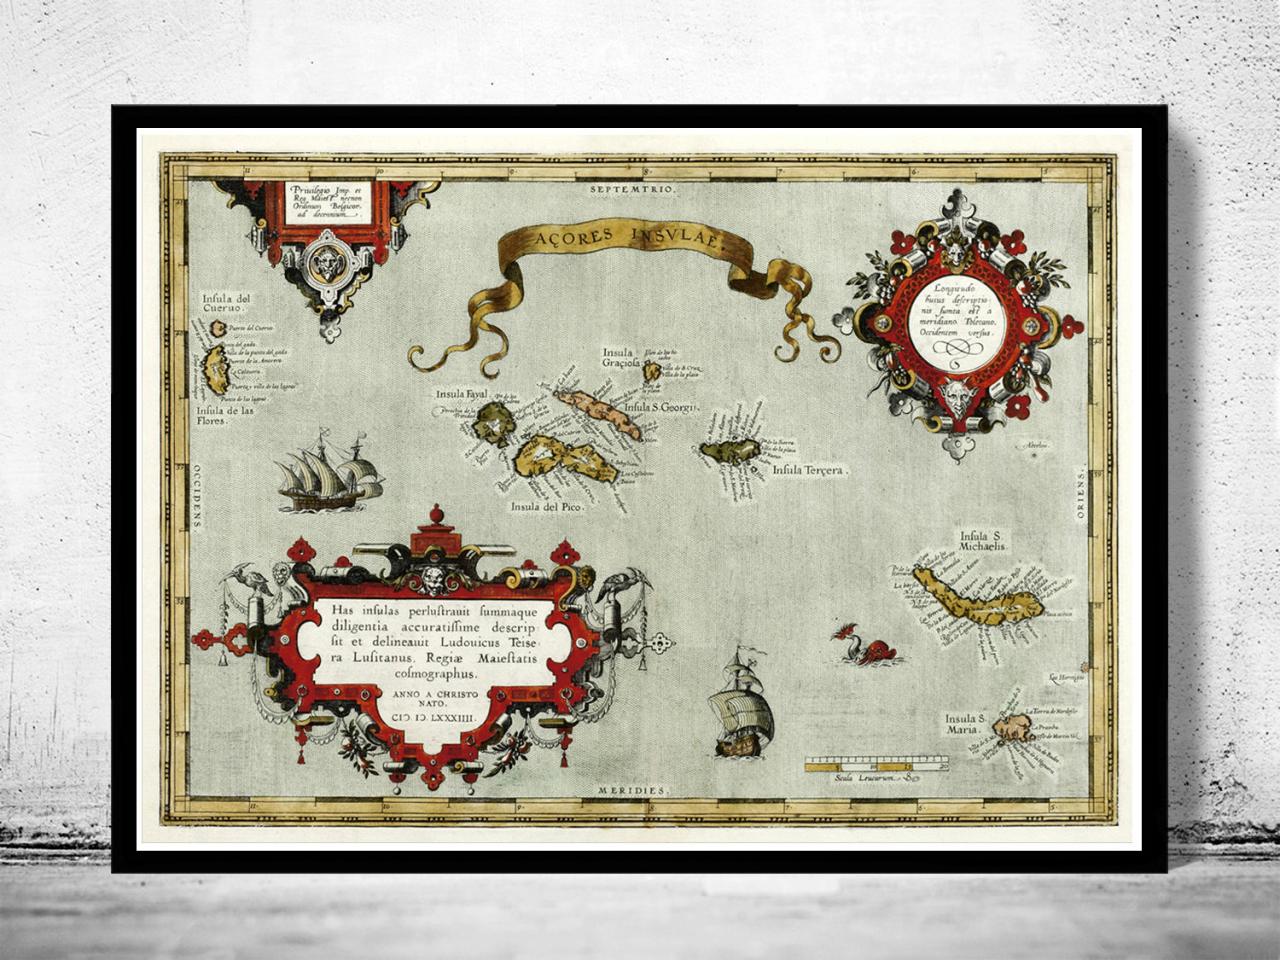 Old Map Of Açores Azores Islands 1584, Portuguese Map